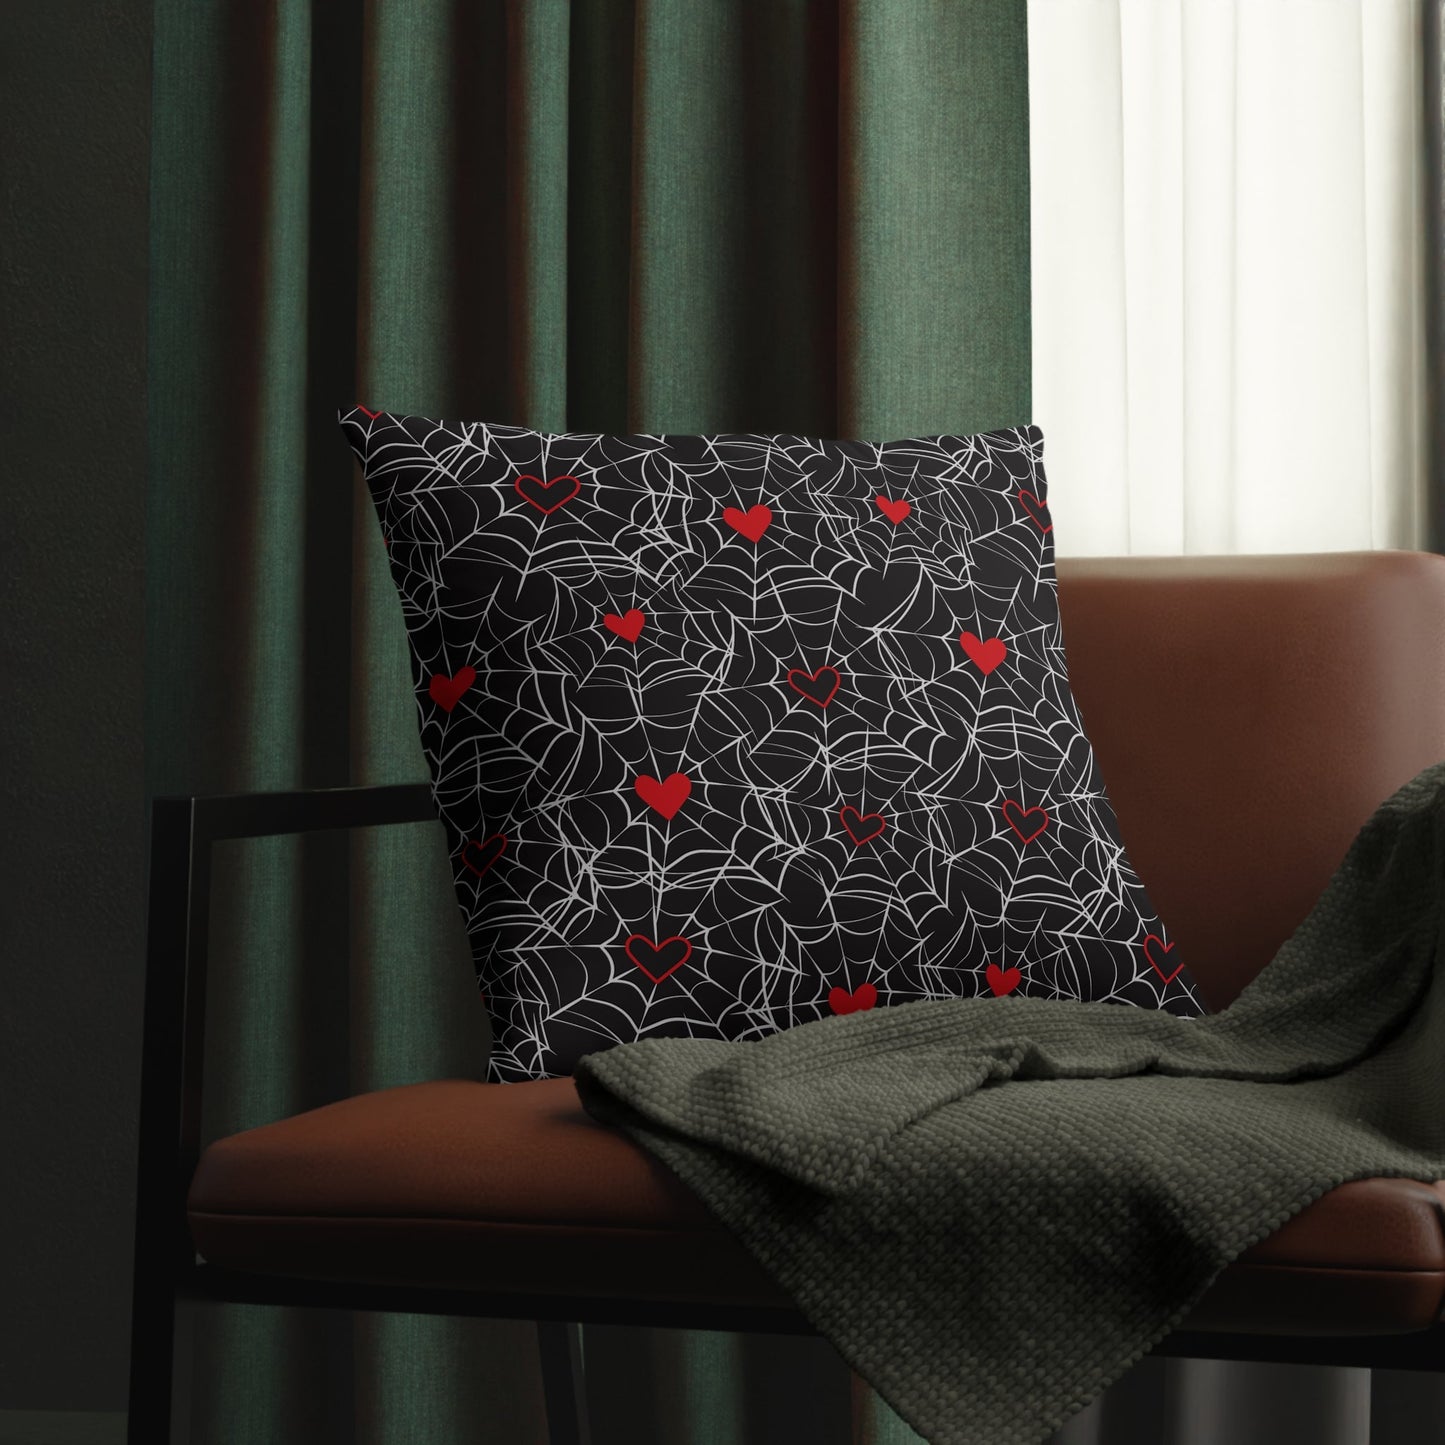 Home Decor - Spider Web Hearts Waterproof Pillows